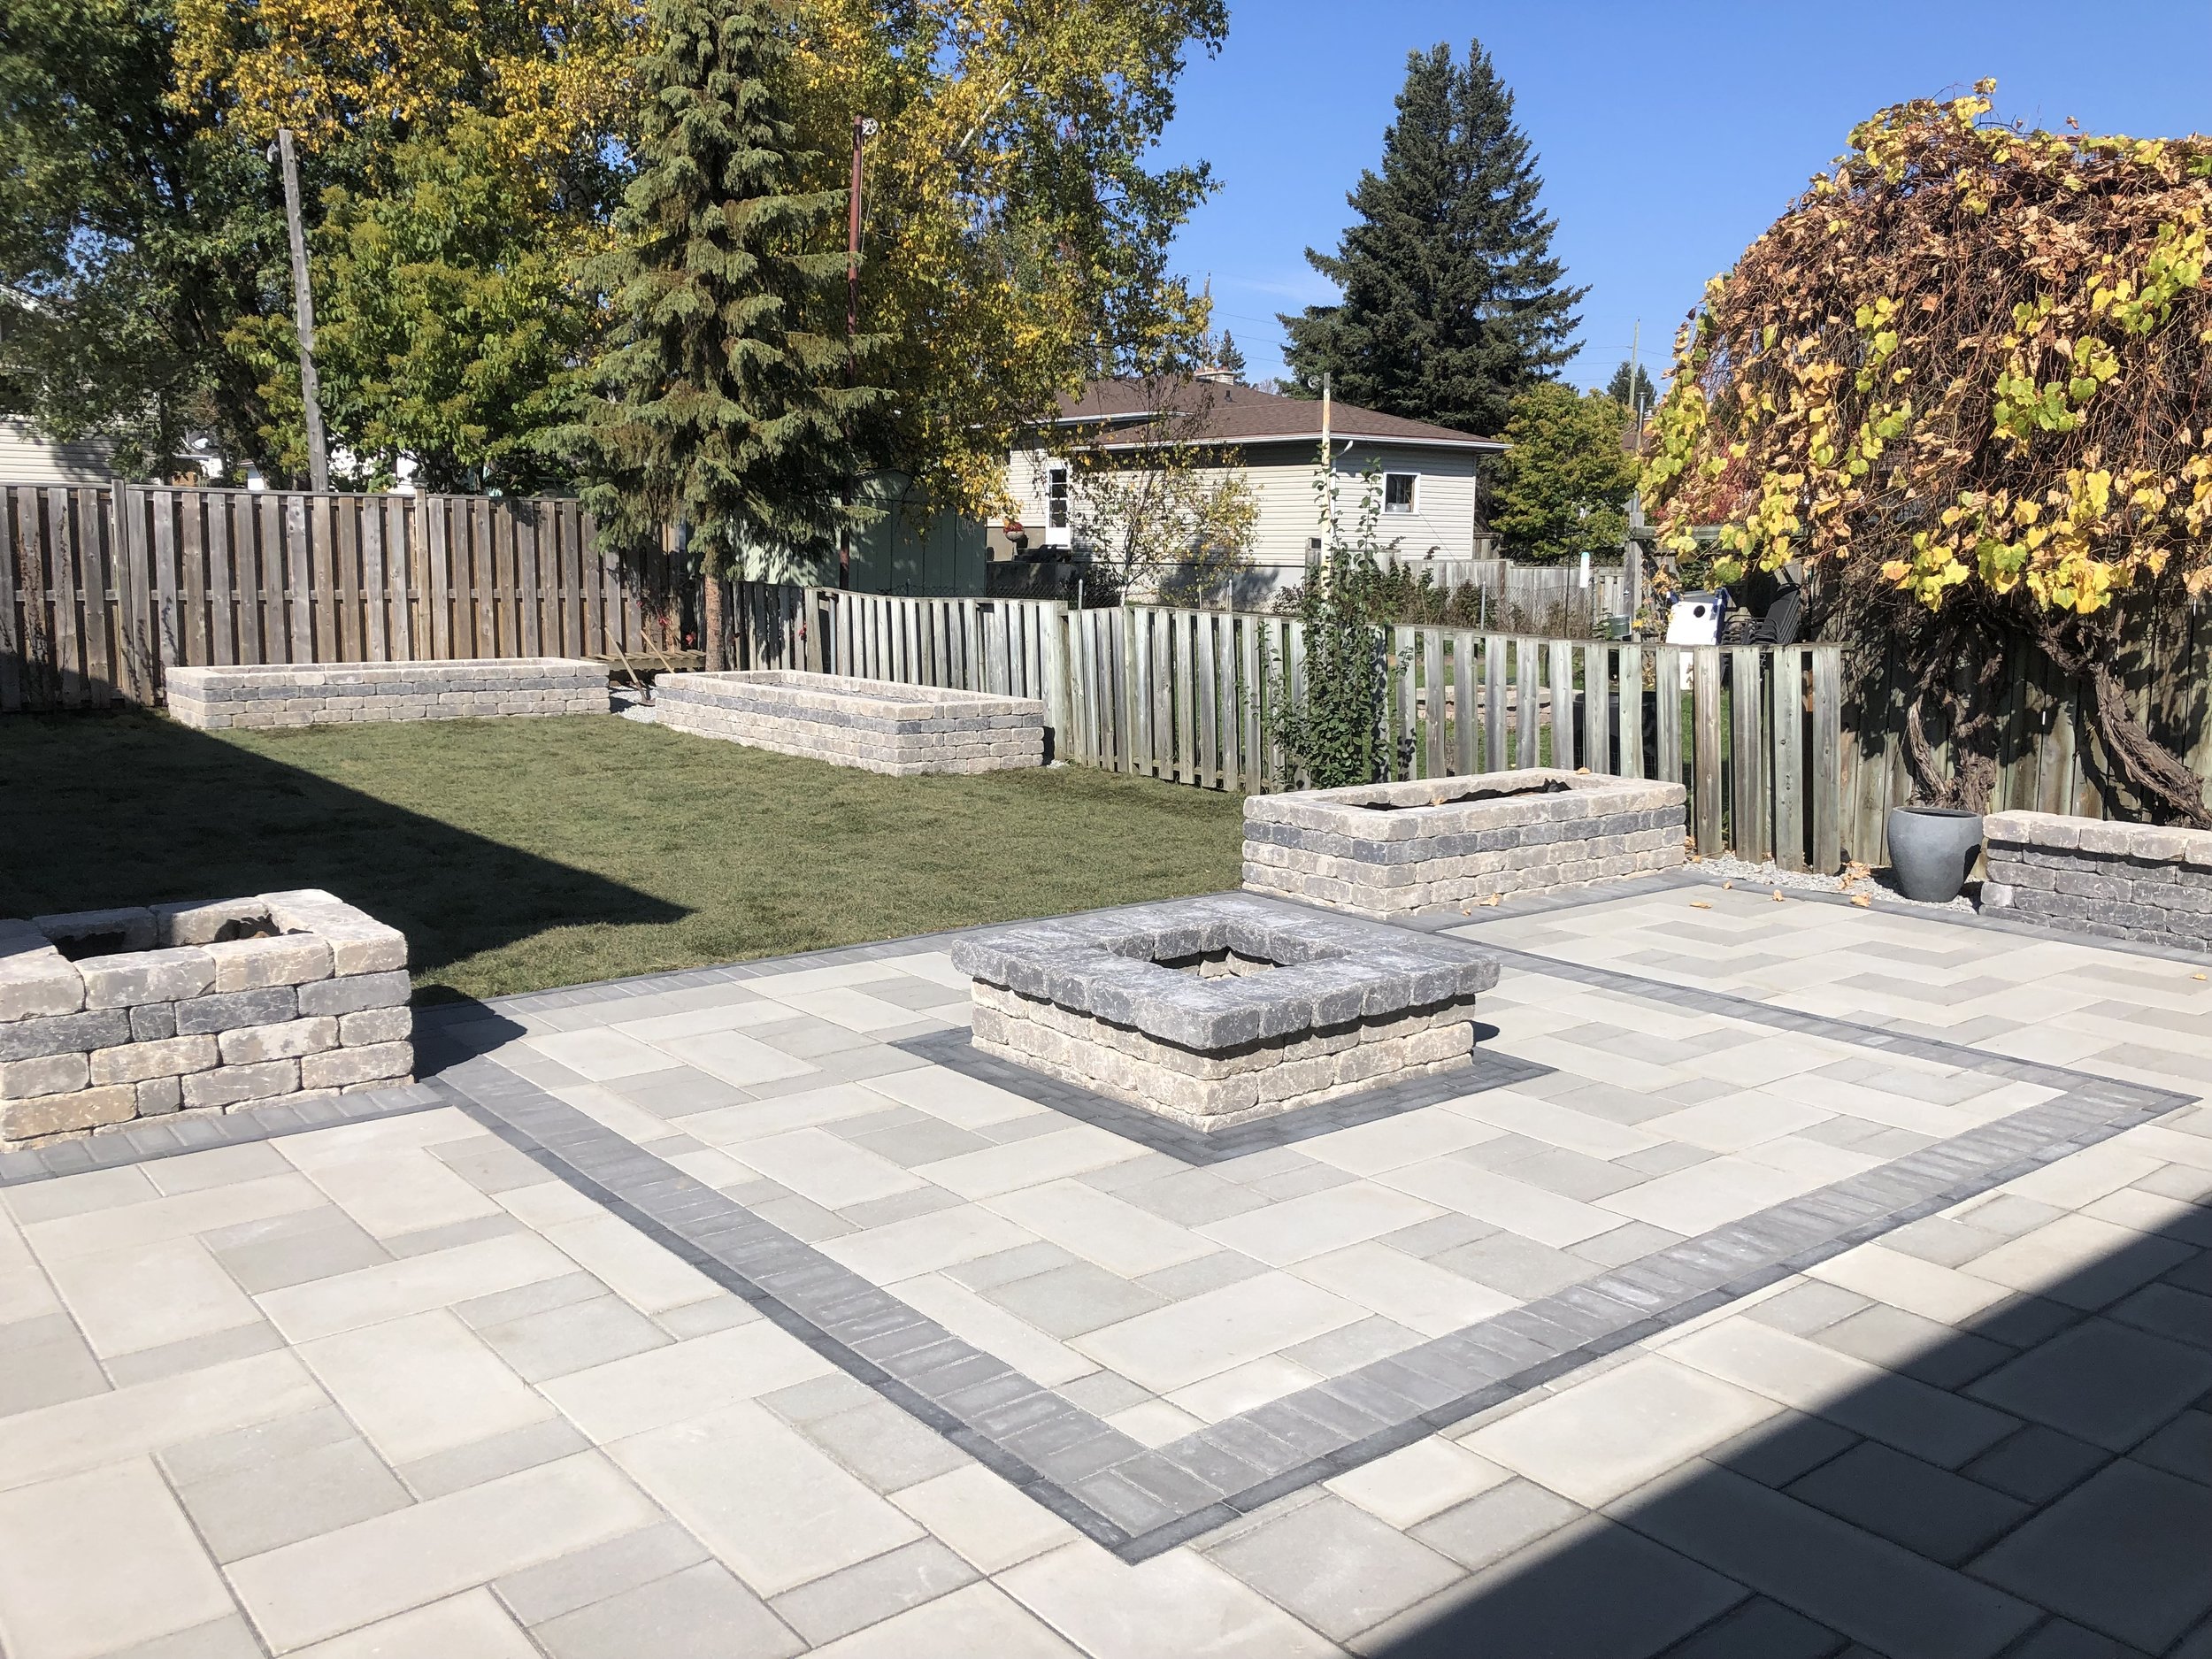 Barkman Broadway Pavers with Nordic Stone and Techobloc Border